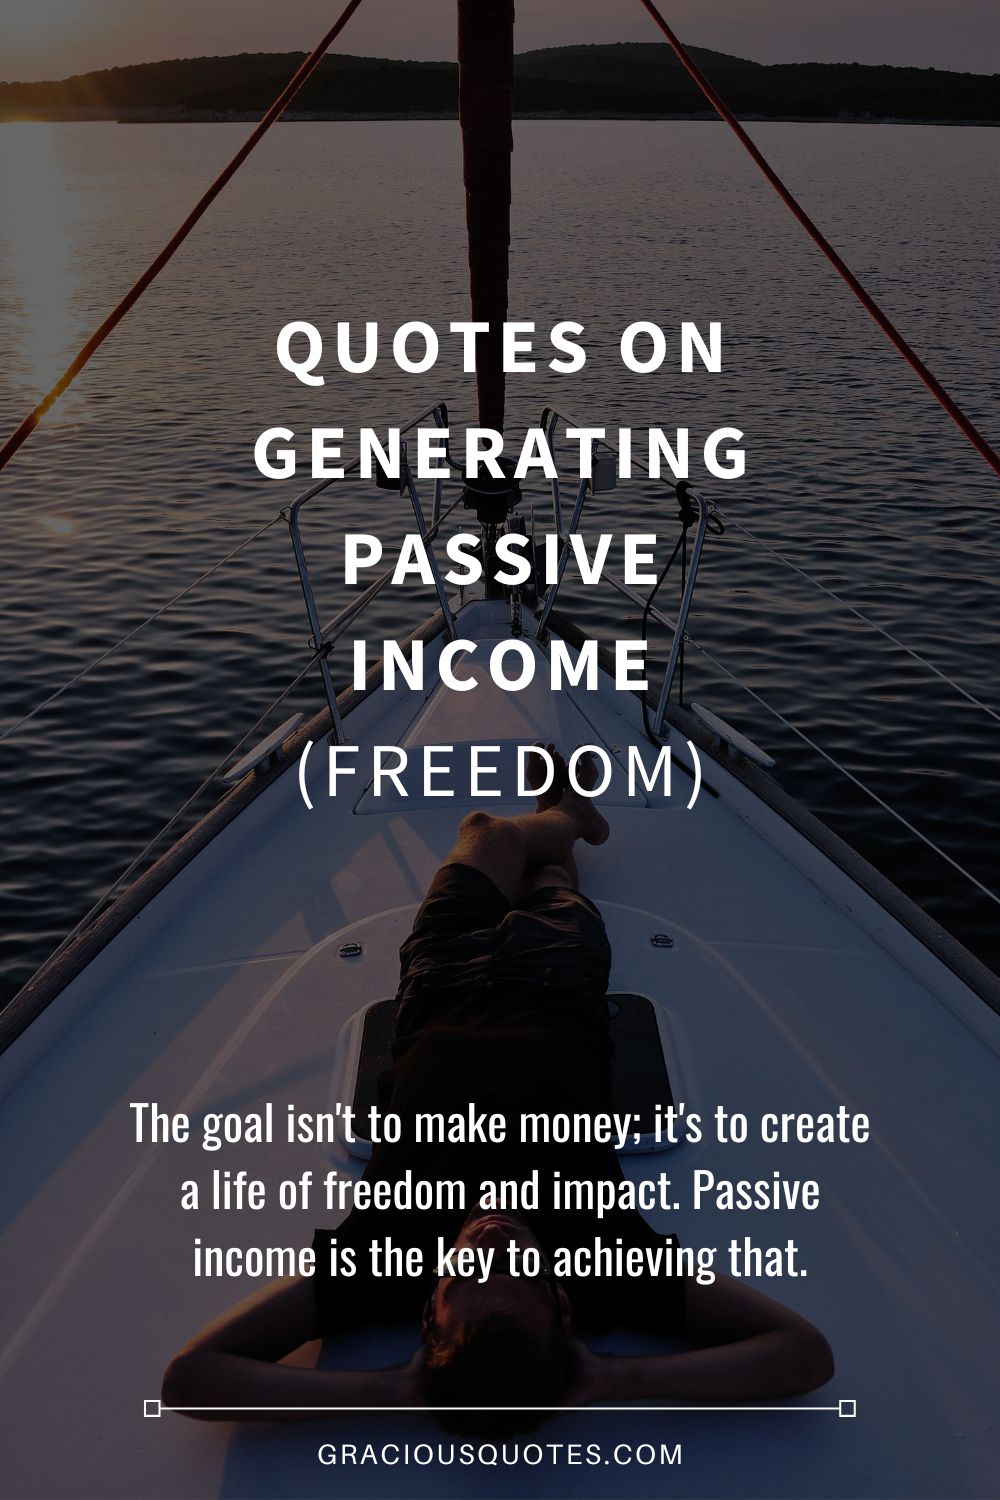 Quotes on Generating Passive Income (FREEDOM) - Gracious Quotes